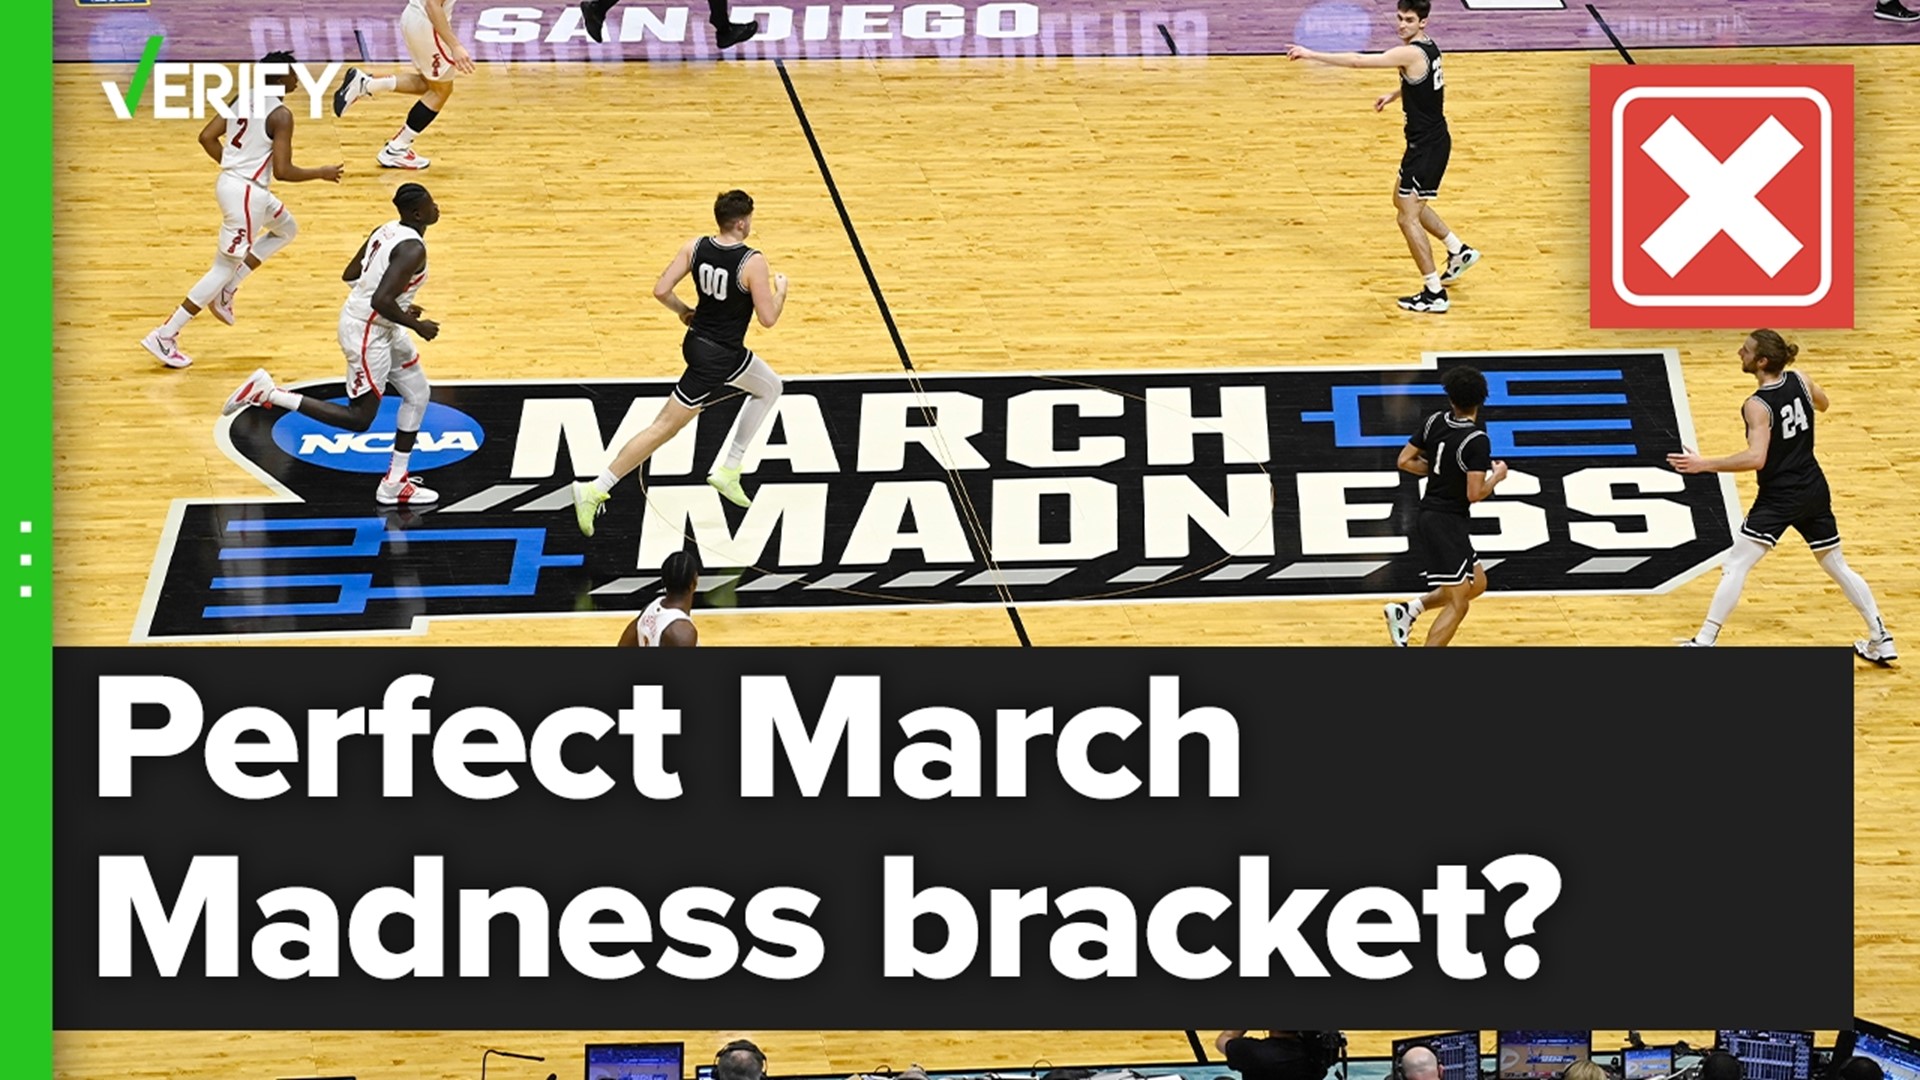 Has there ever been a documented case of somebody filling out a perfect men's bracket? The VERIFY team confirms this is false.